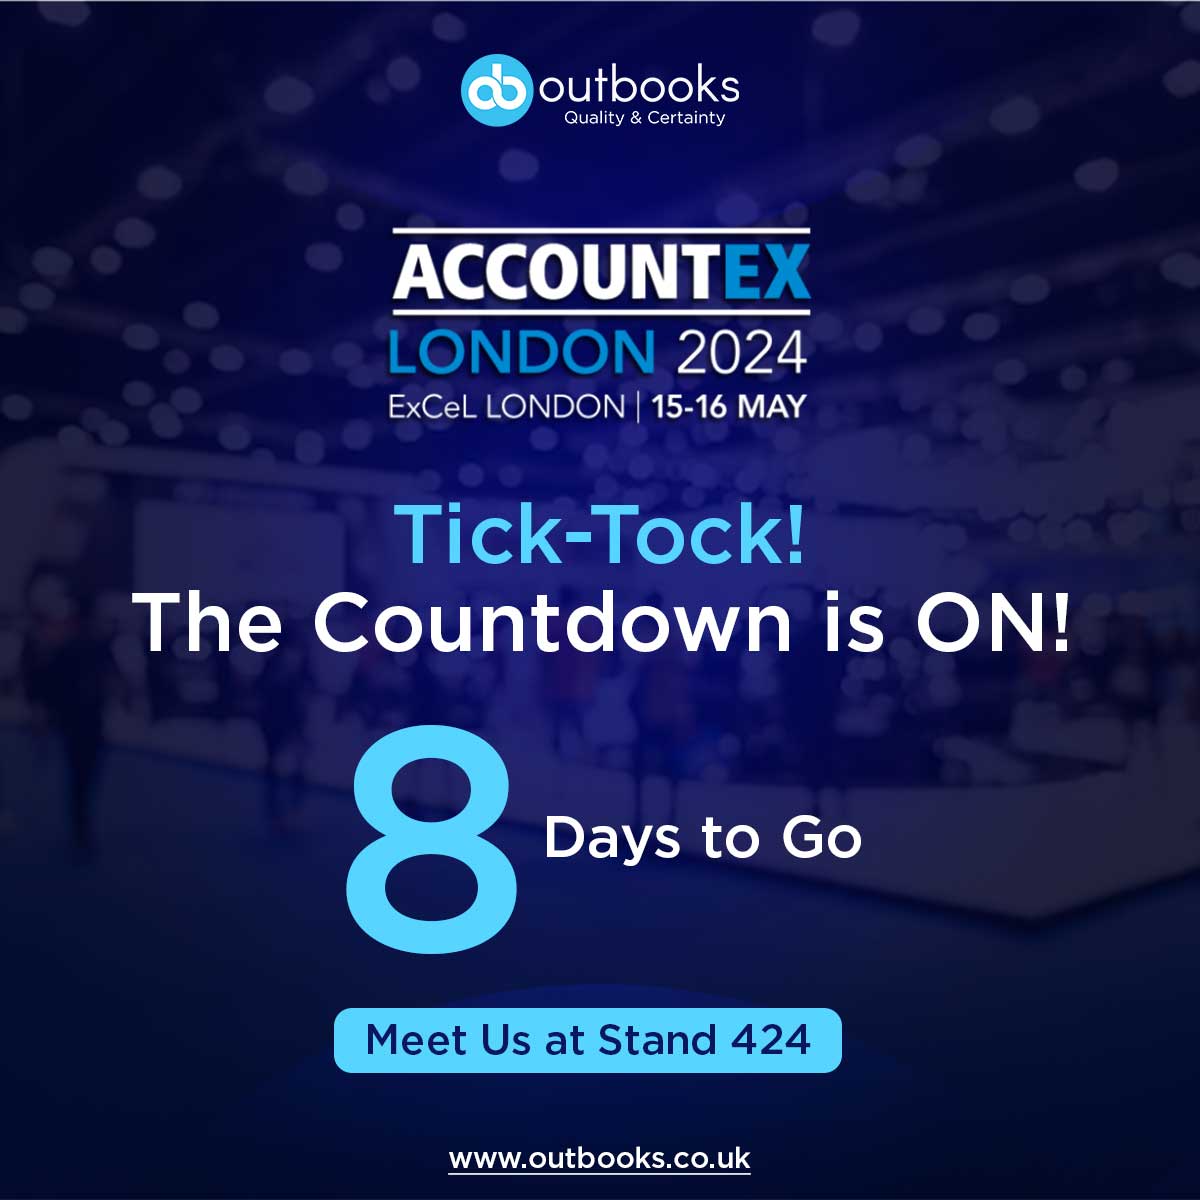 Join Outbooks at stand 424! We'd love to connect with you! 

SEE YOU THERE!

#Accountexlondon #Accountex2024 #UKaccountants #Outbooks #Accountex